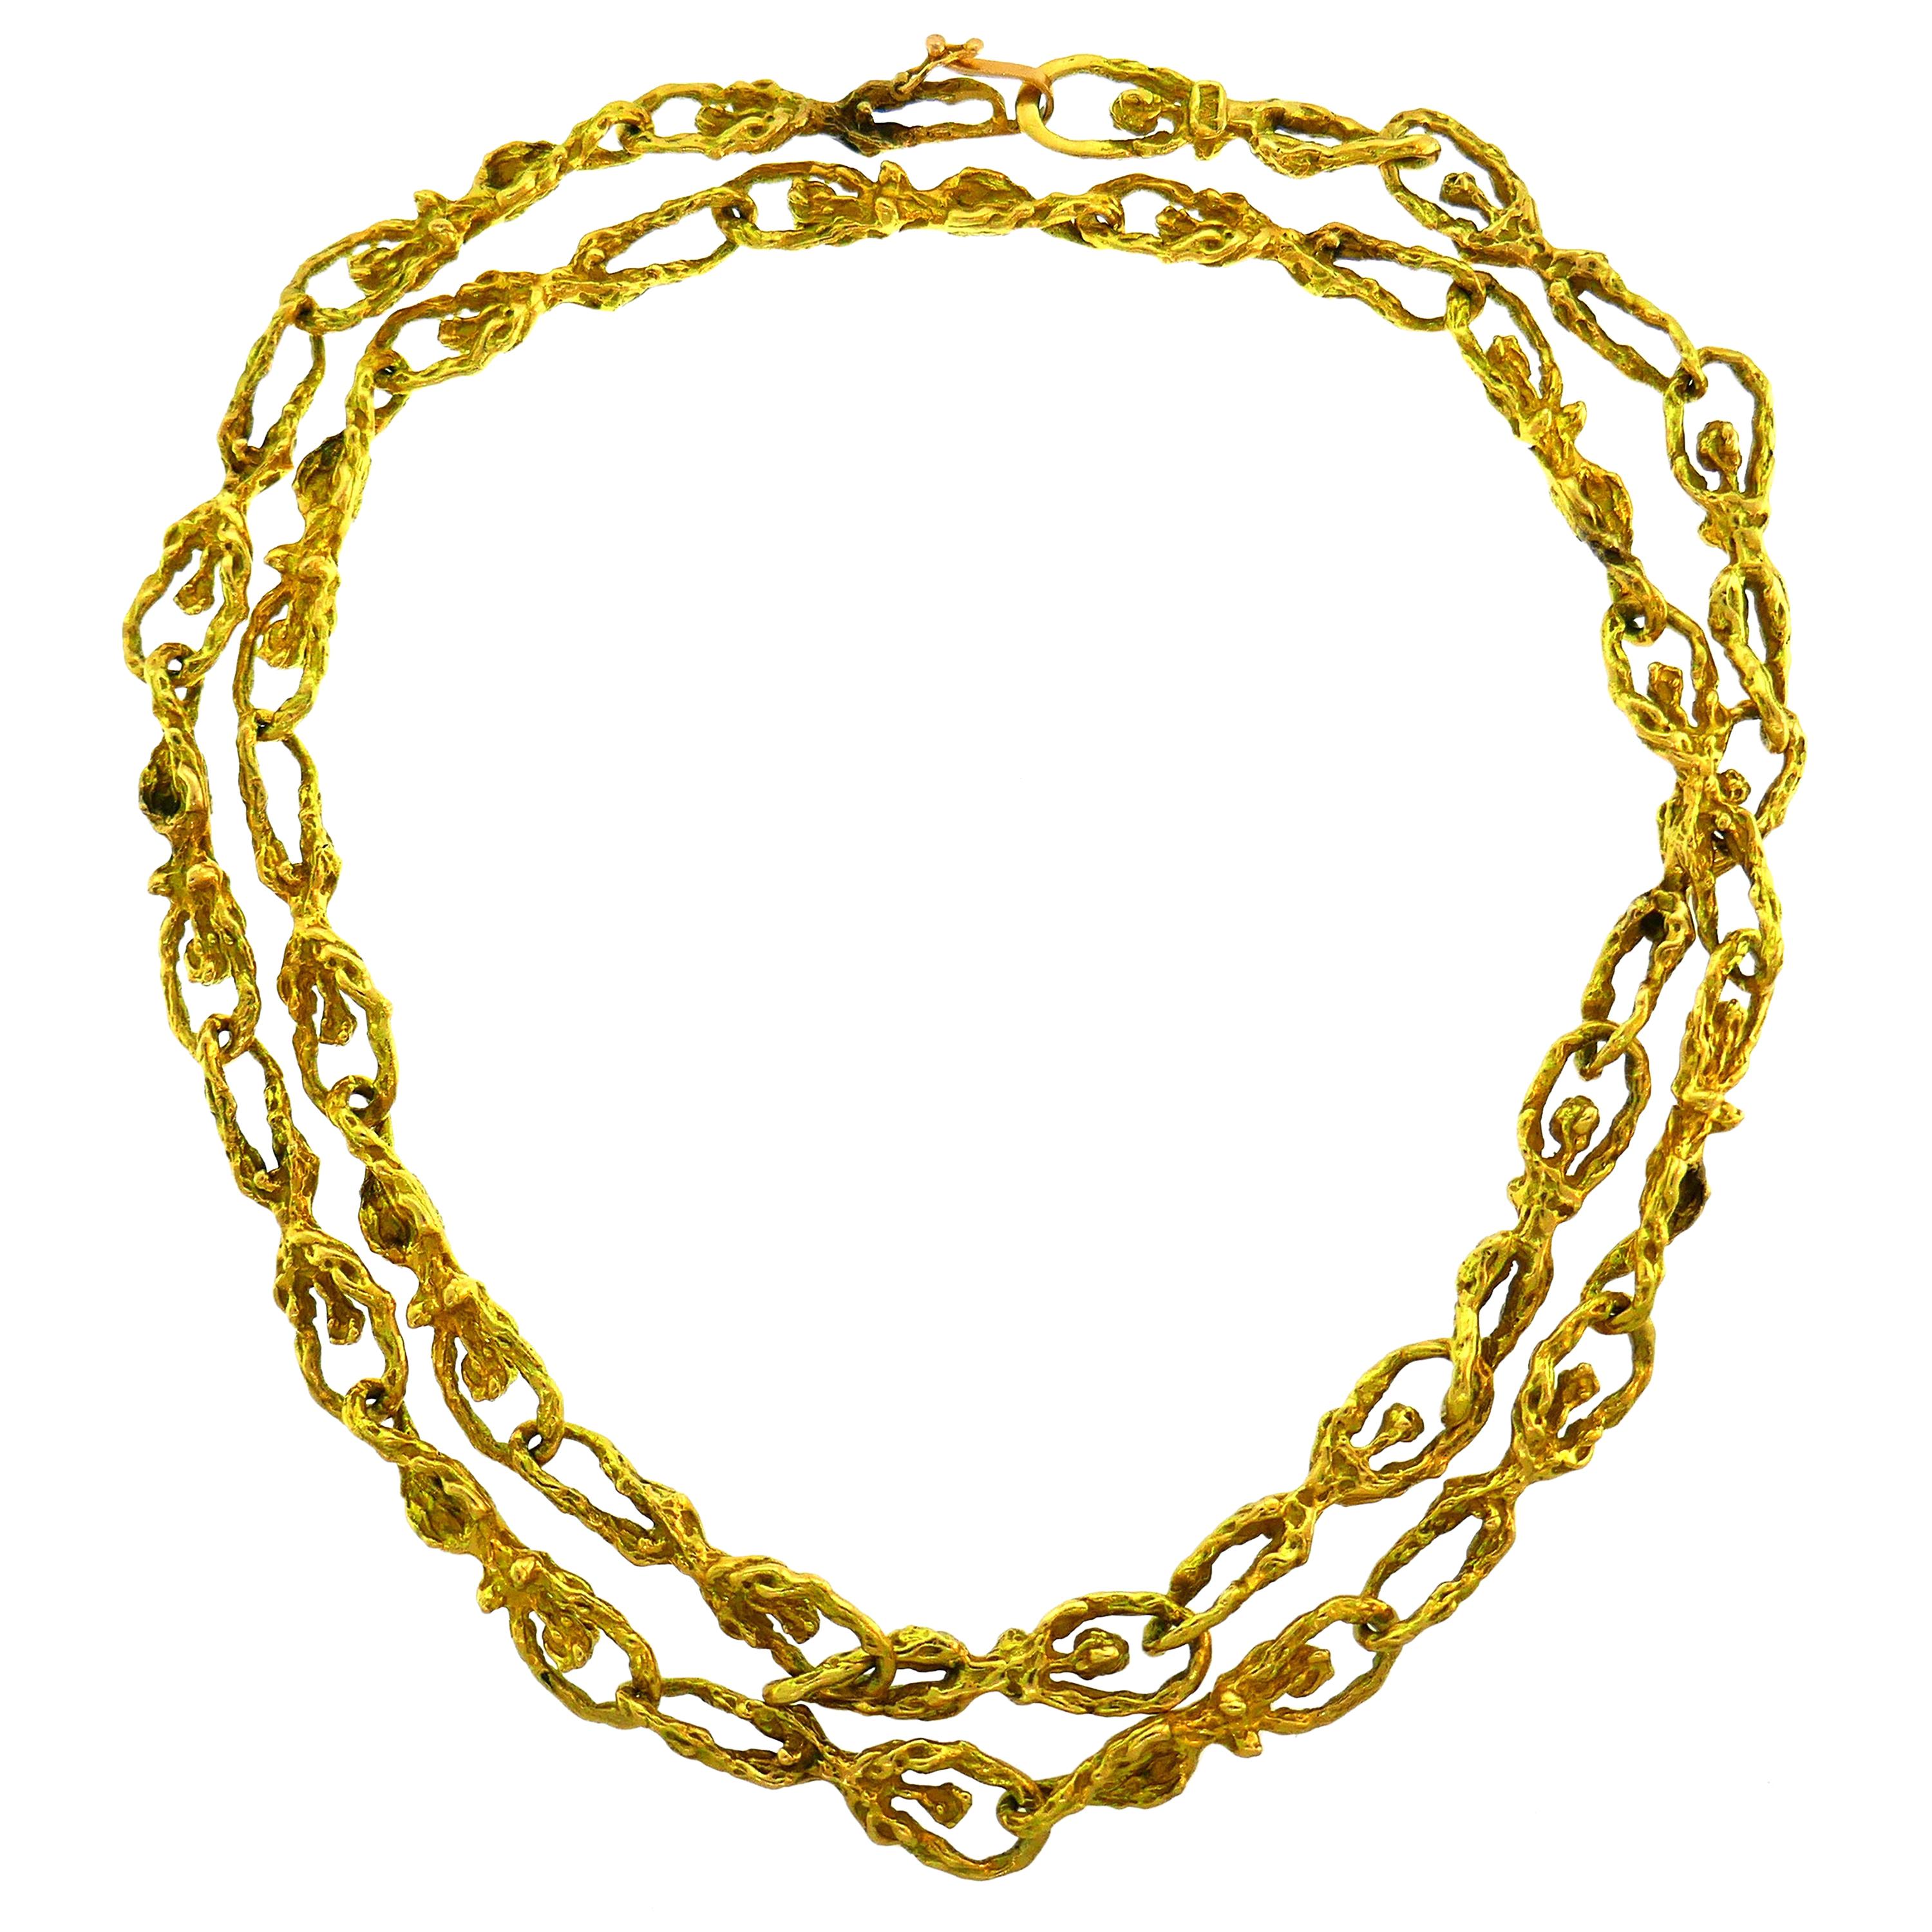 Yellow Gold Chain Necklace, French Signed WV, 1980s